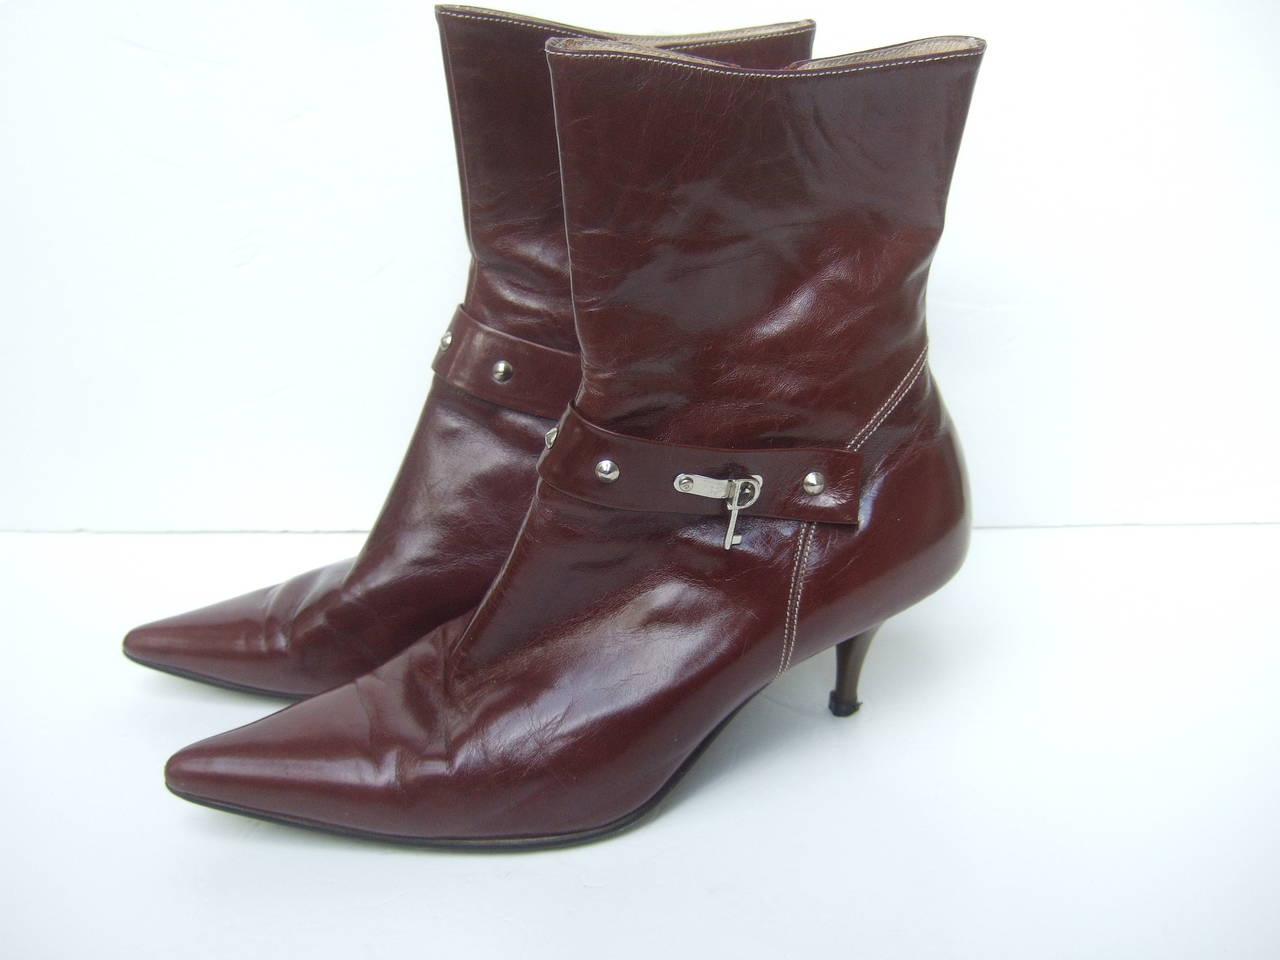 Dior Brown leather ankle boots with lock & key charms Size 40
The stylish high fashion ankle boots are embellished with a silver metal key on one boot. The other boot is adorned with a silver metal padlock stamped Dior

The supple leather is a